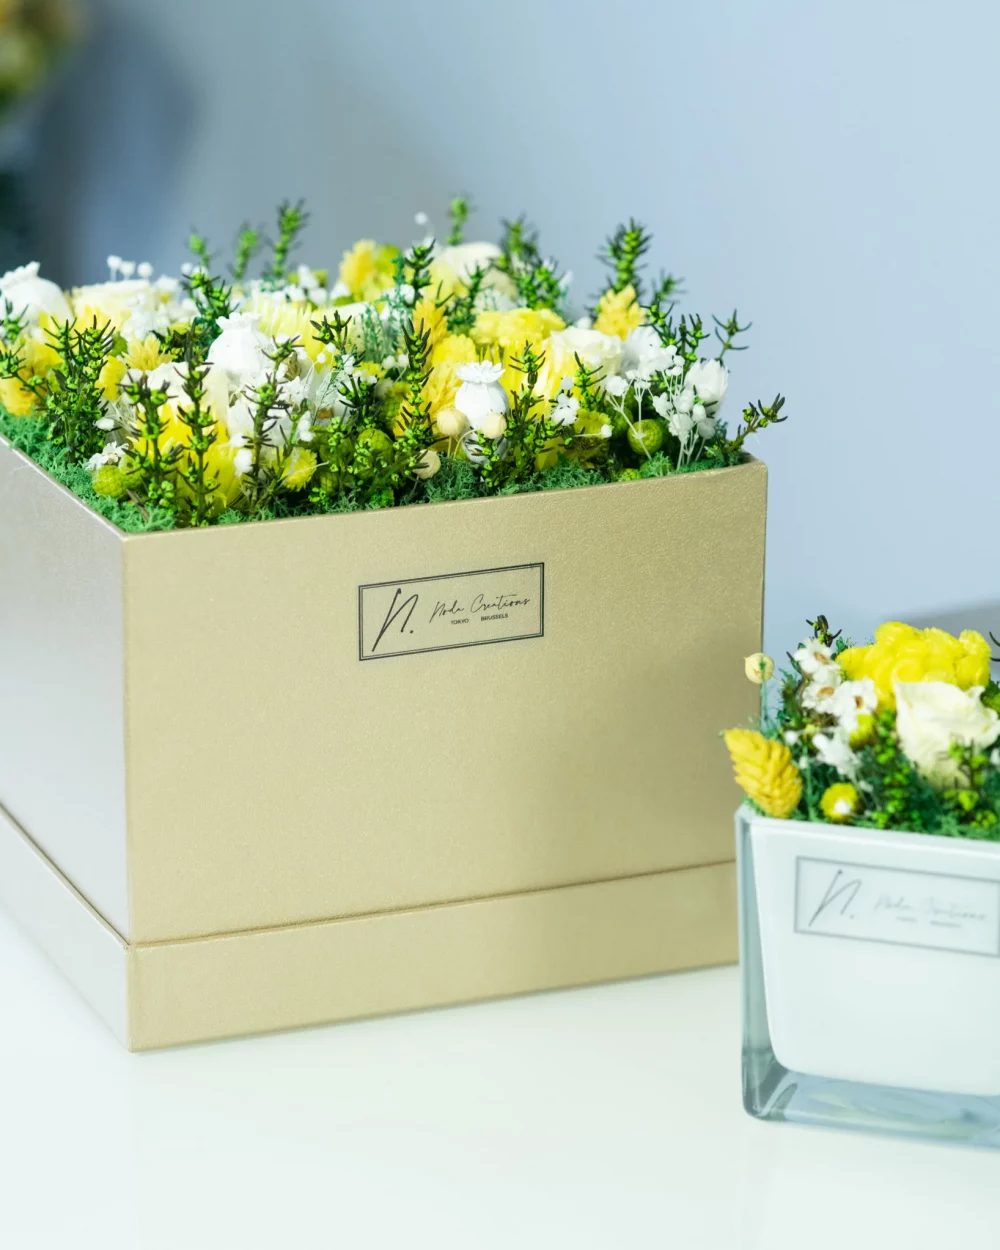 white and yellow preserved flowers in a brown box. a mini sunny garden